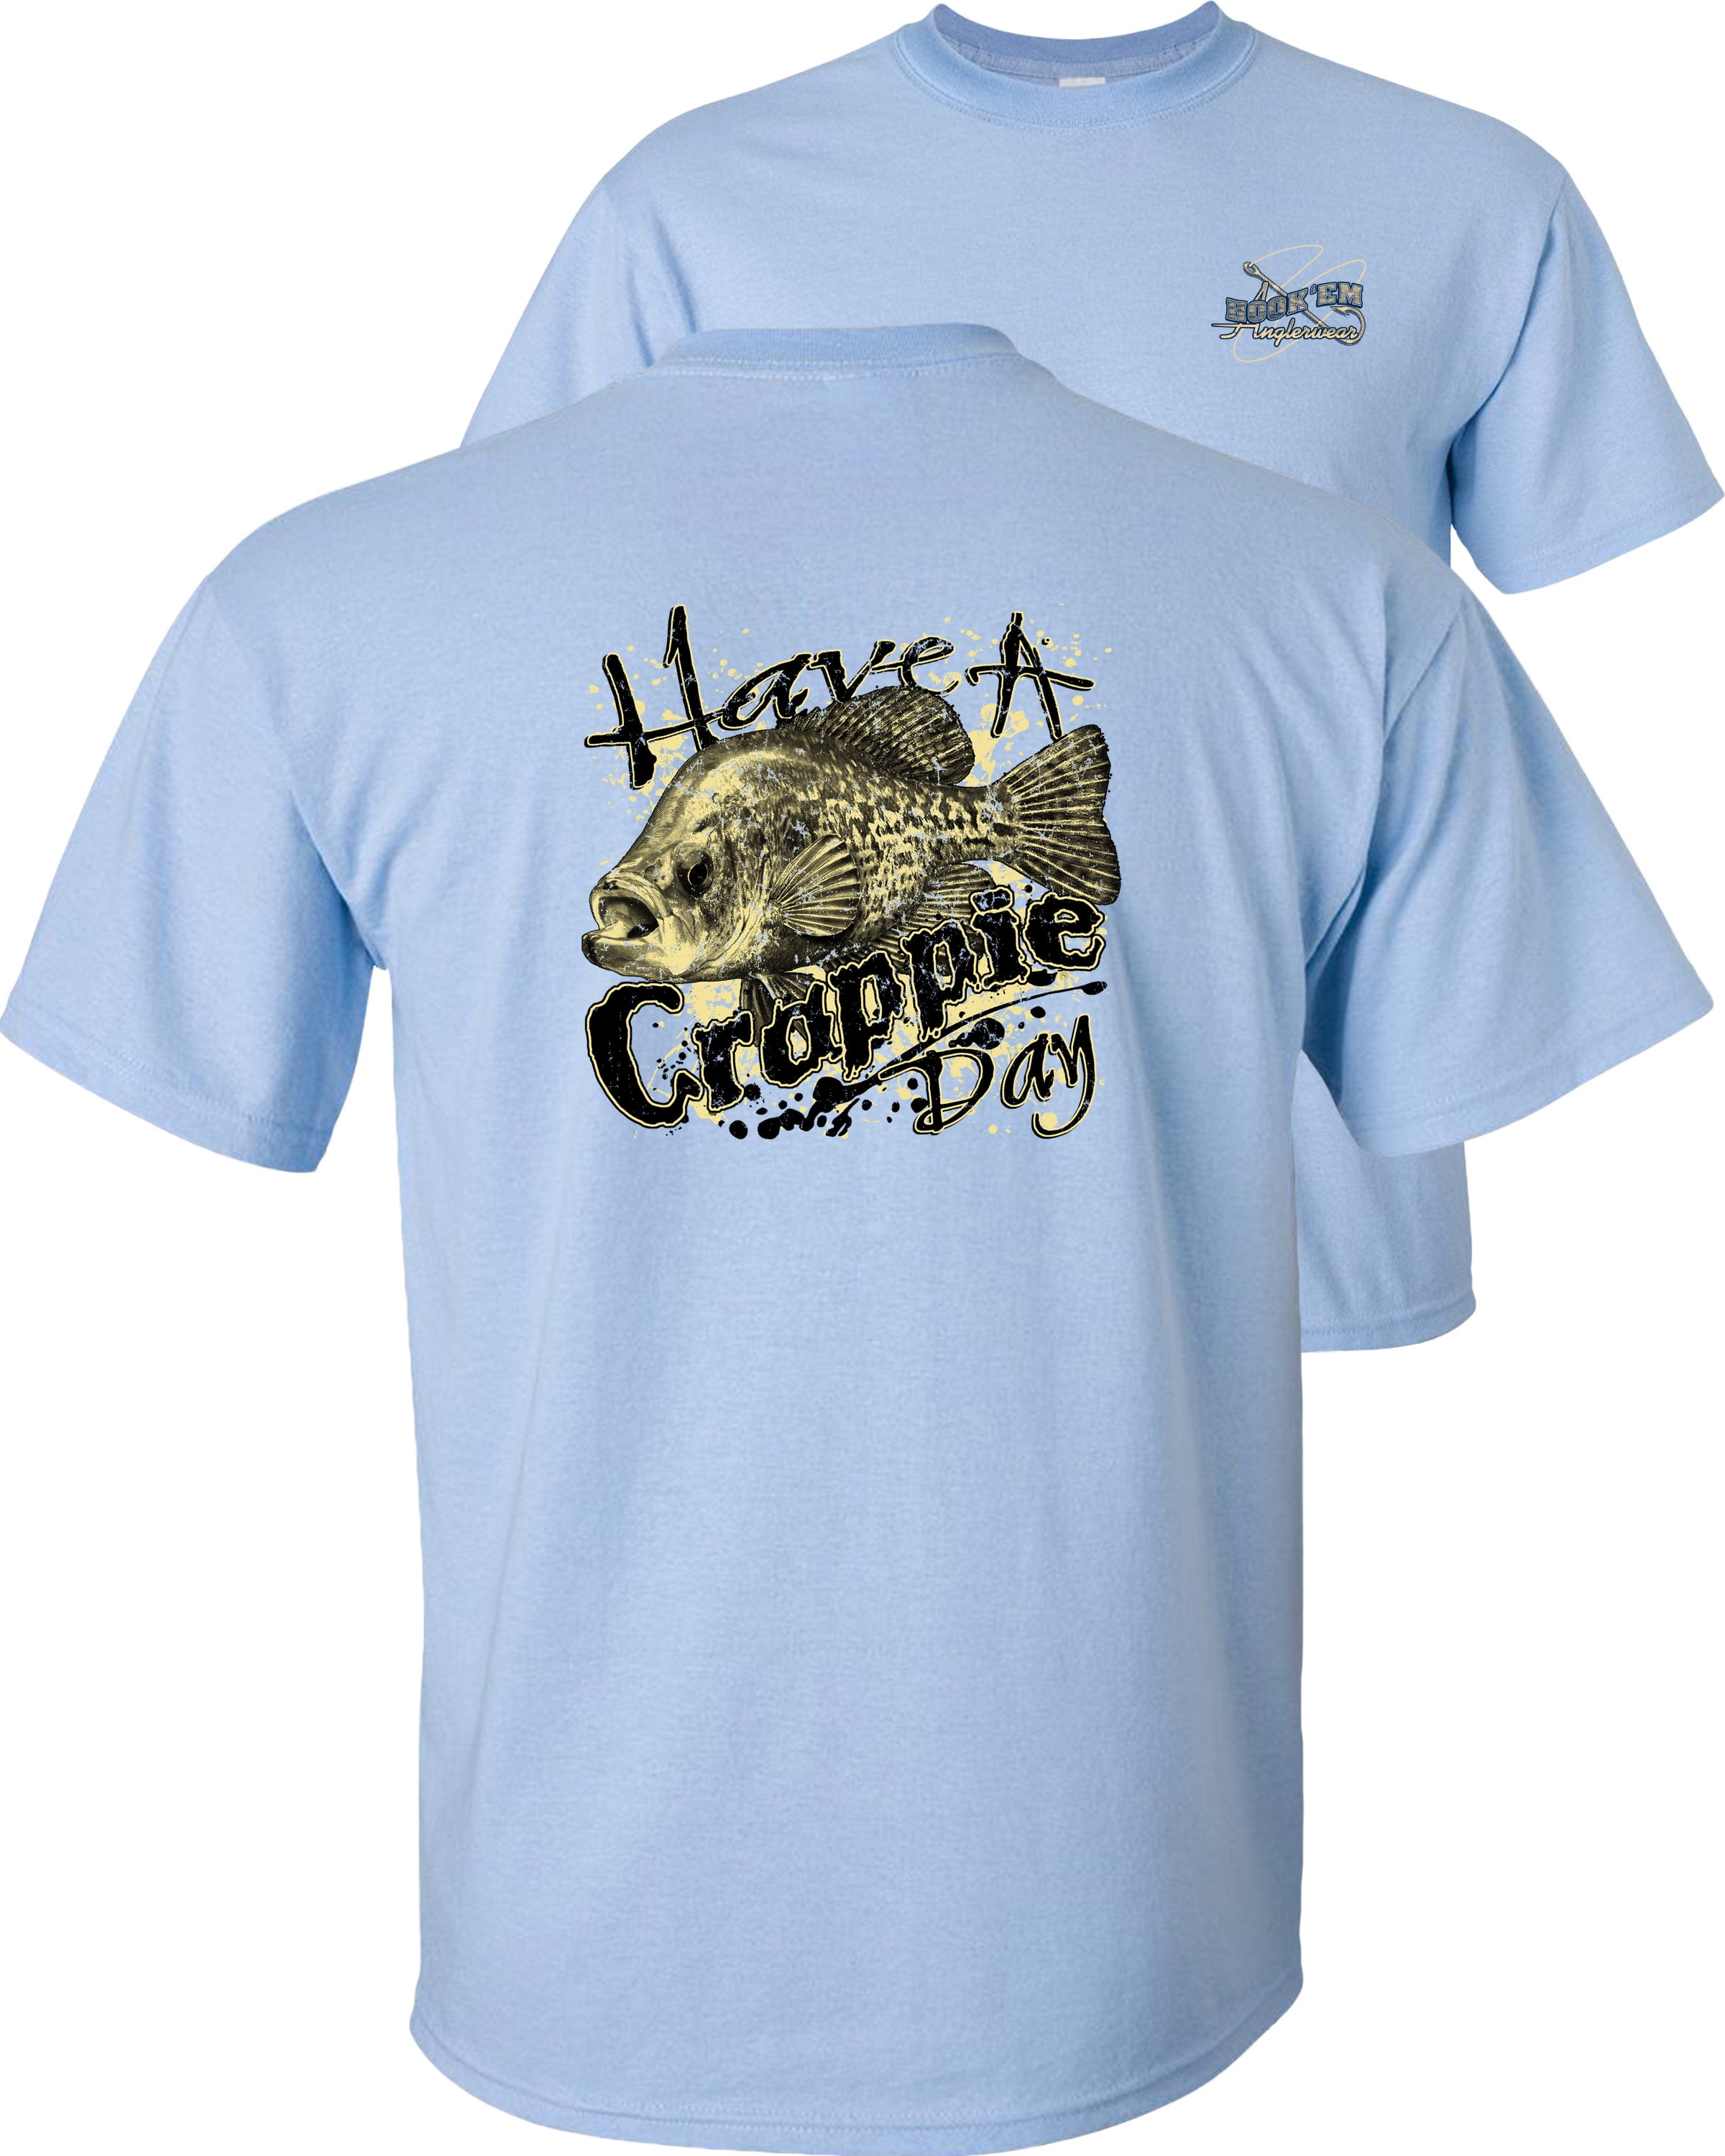 Fair Game Have a Crappie Day T-Shirt, Fishing Graphic Tee-Light